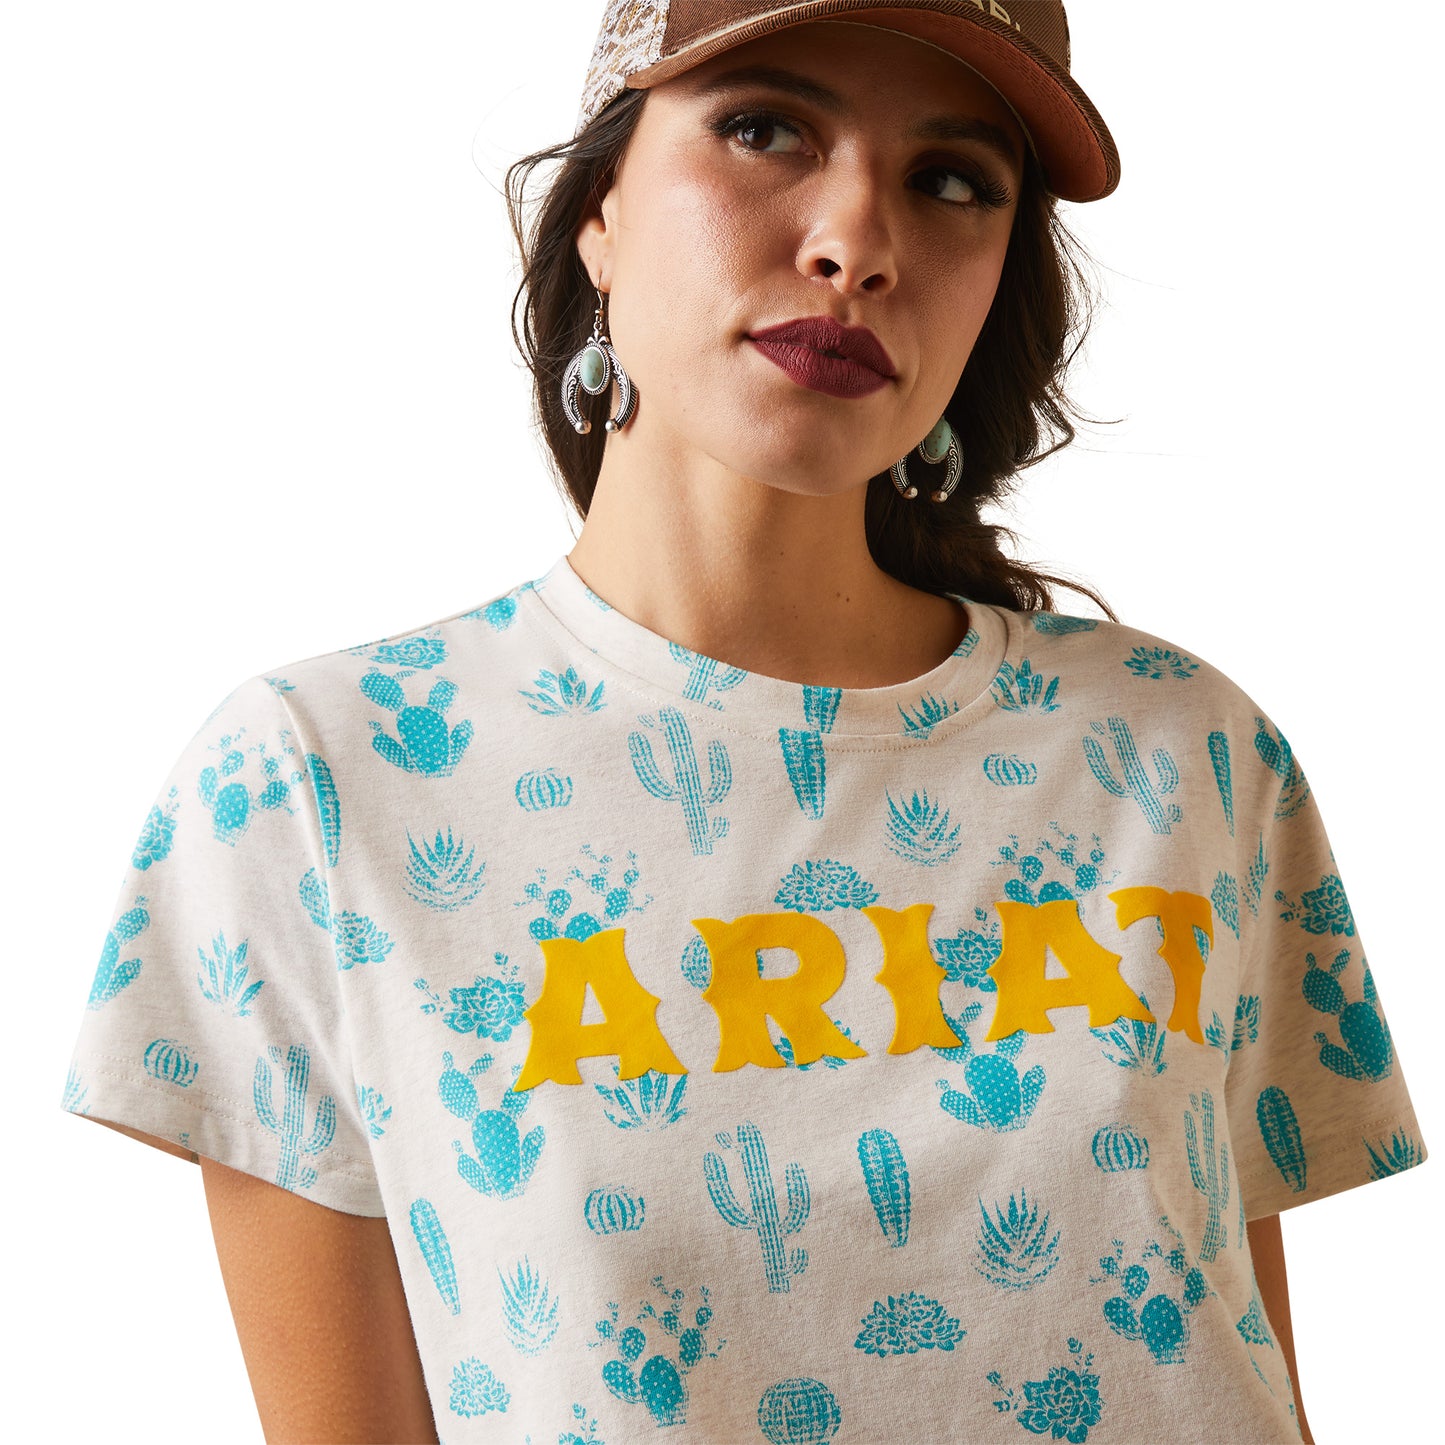 Load image into Gallery viewer, Ariat® Ladies R.E.A.L Cactus Garden White T-Shirt 10043686
